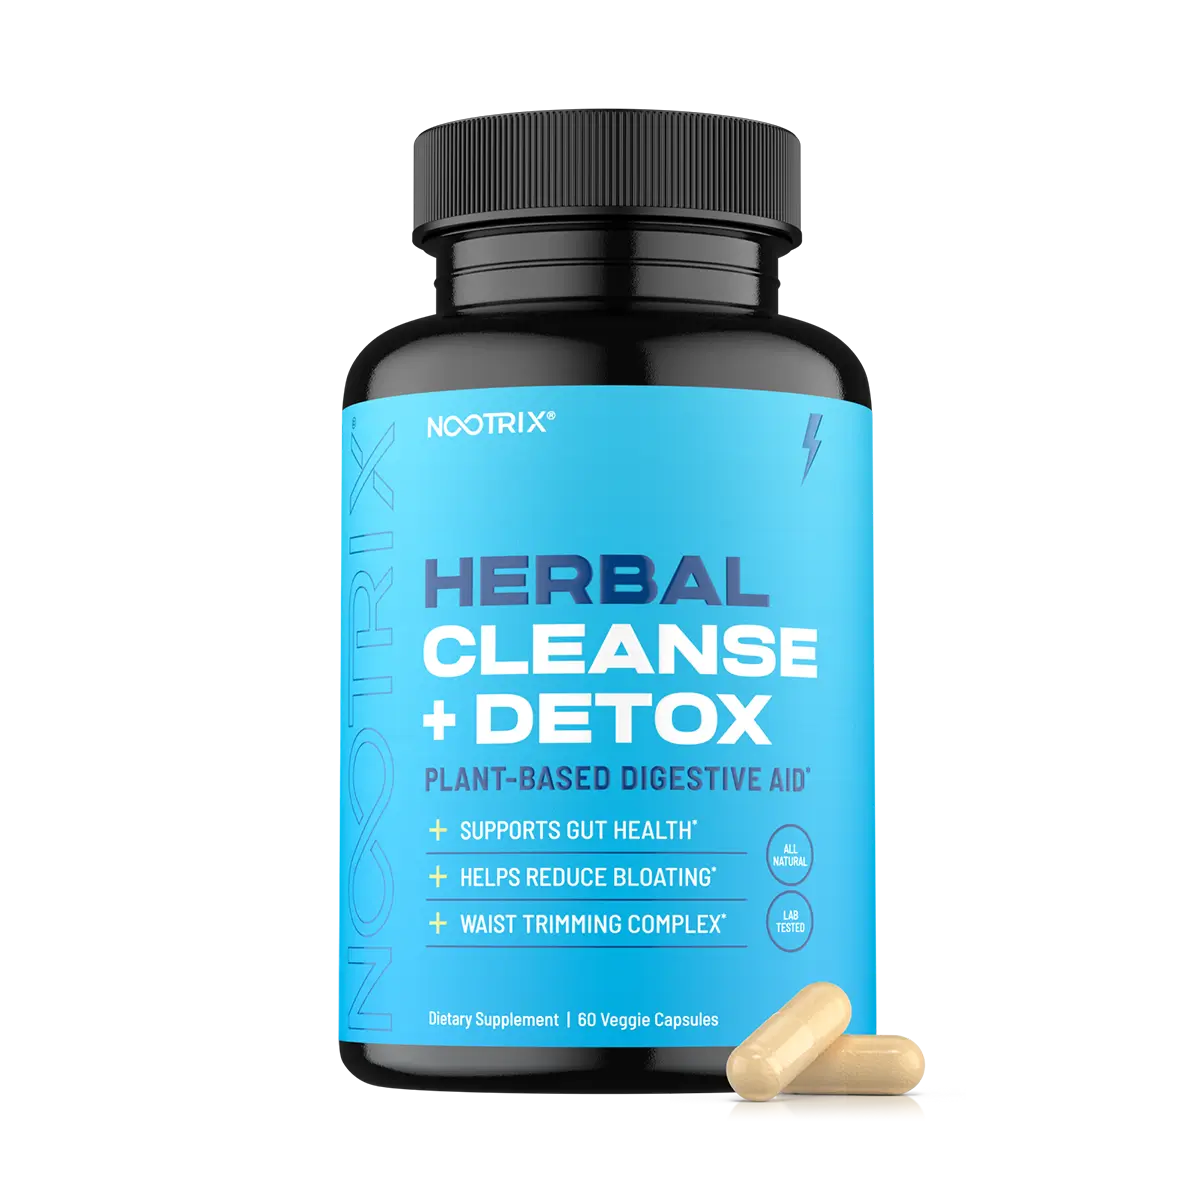 Nootrix Herbal Cleanse + Detox 30-Day Supply